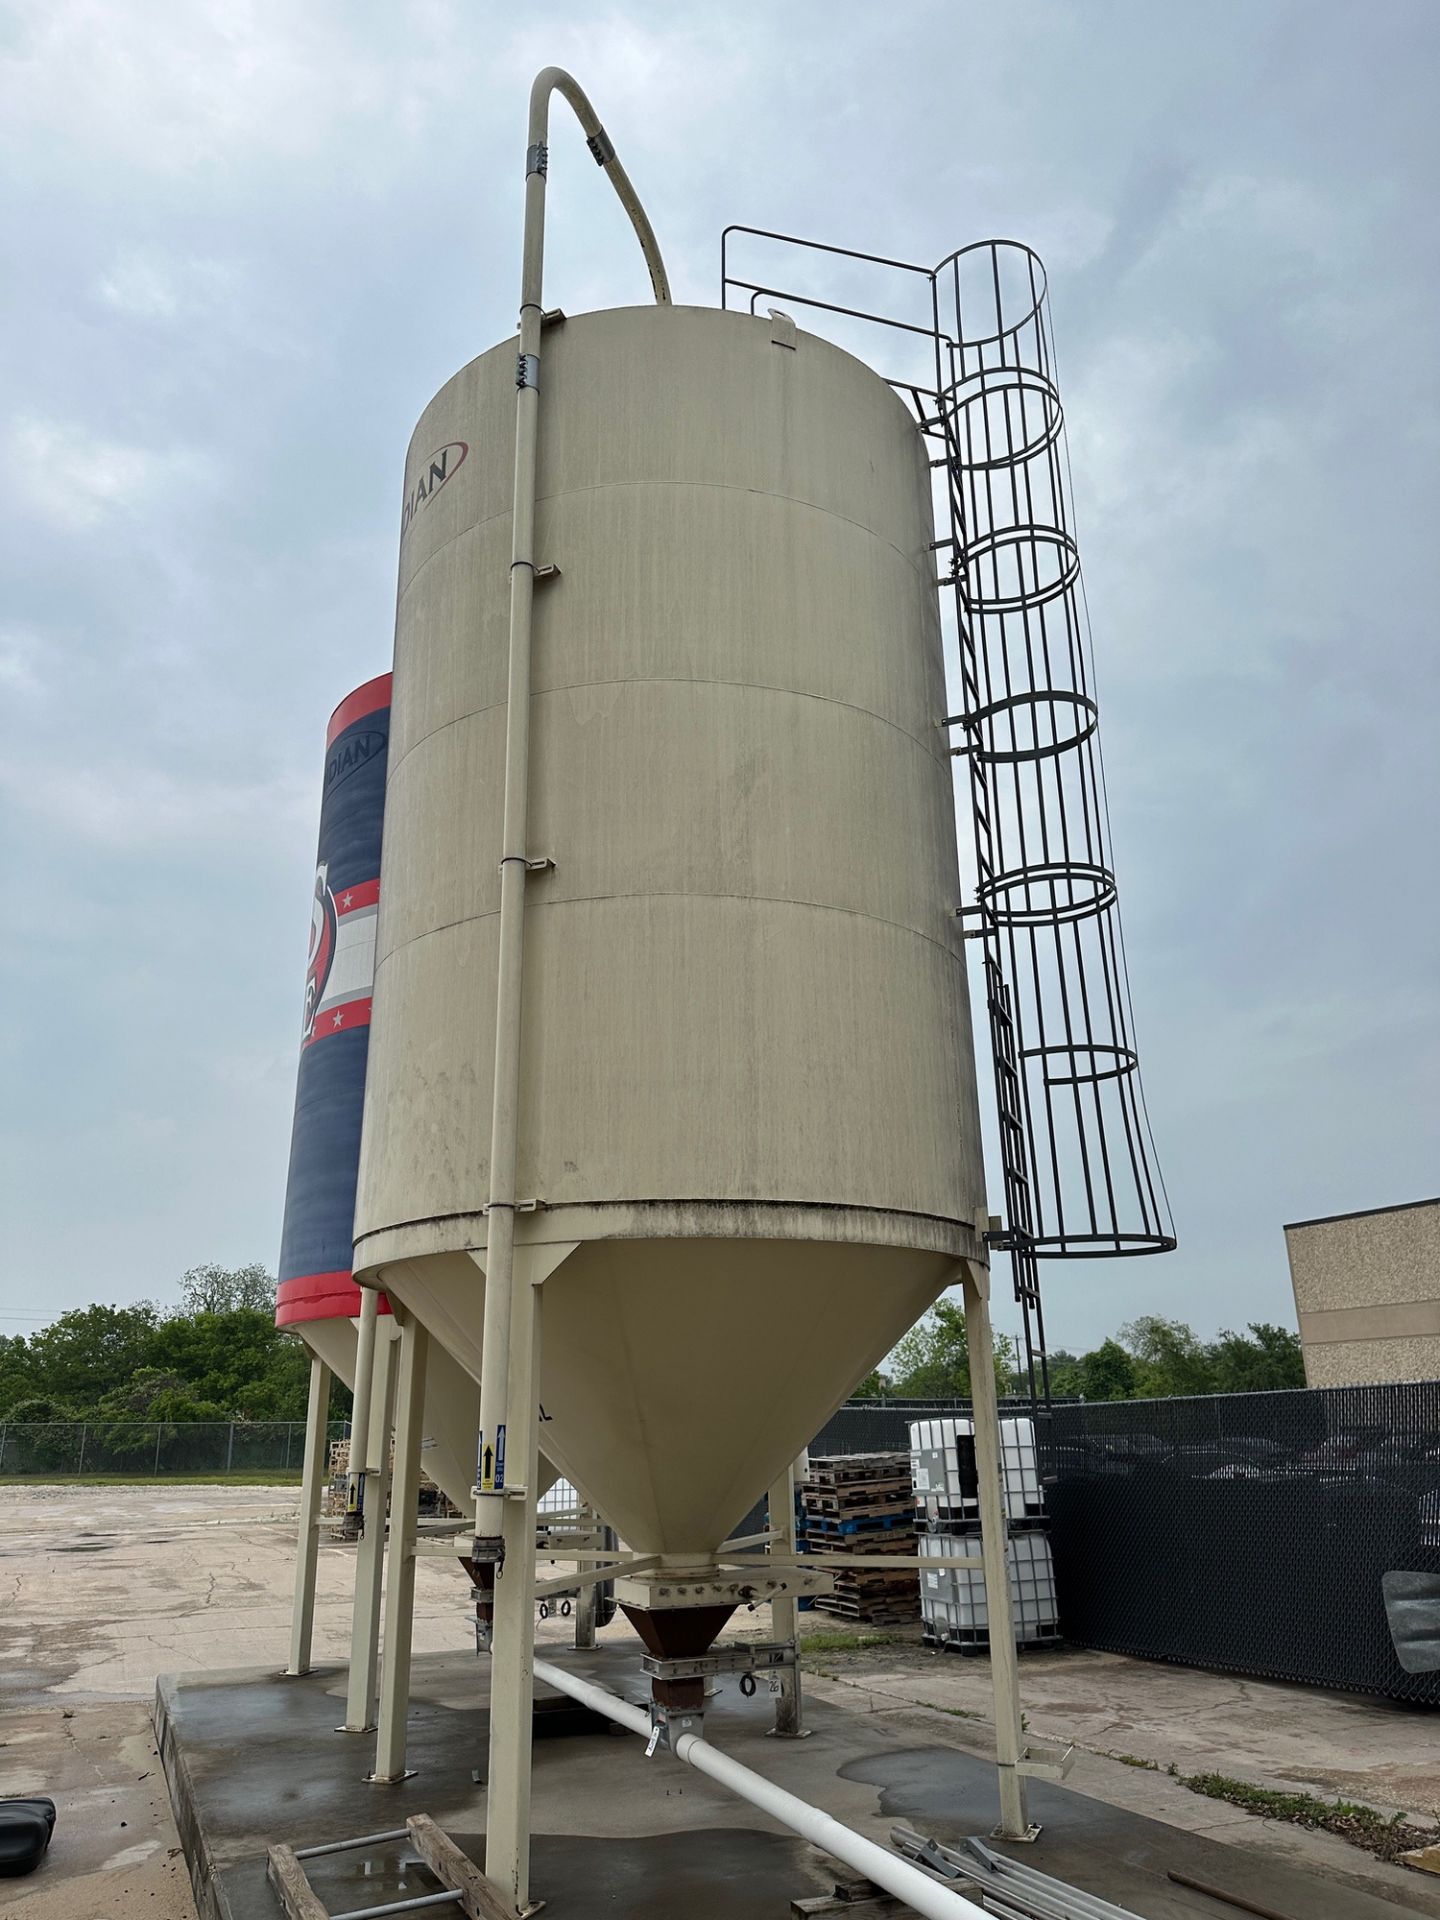 Meridian Grain Silo (Approx.12' Diameter and 32' O.H.) | Rig Fee $6350